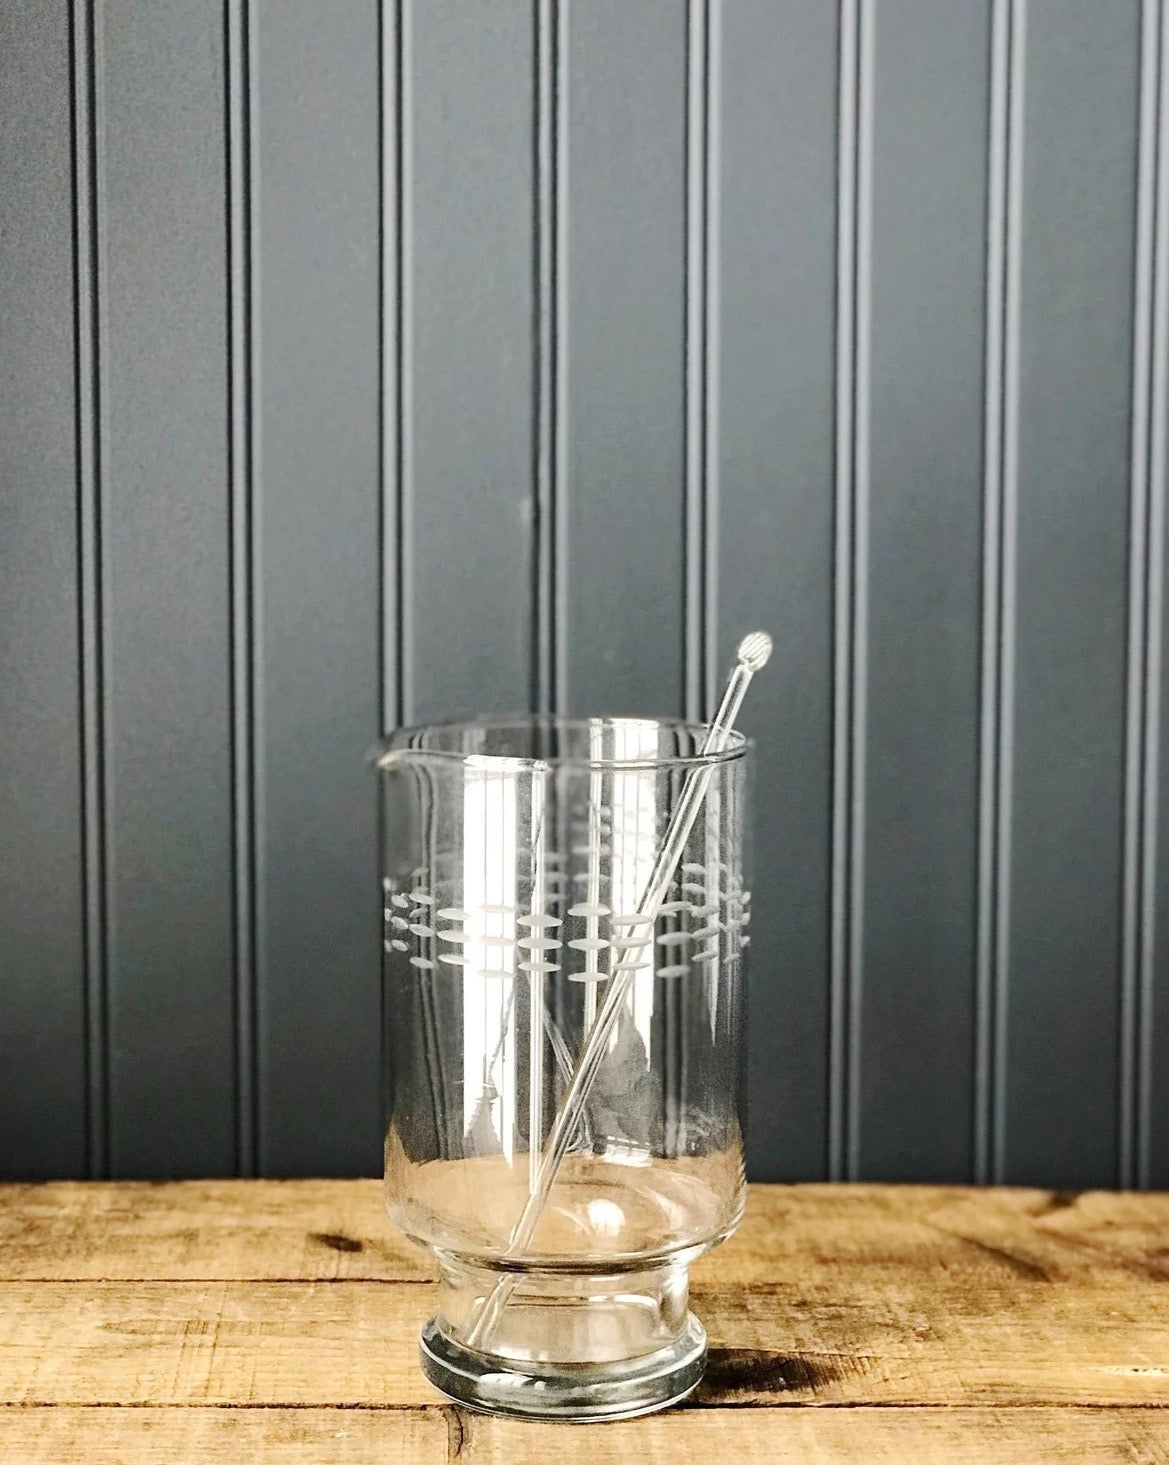 Vintage Etched Glass Cocktail Pitcher / Etched Glass Carafe with Stirrer